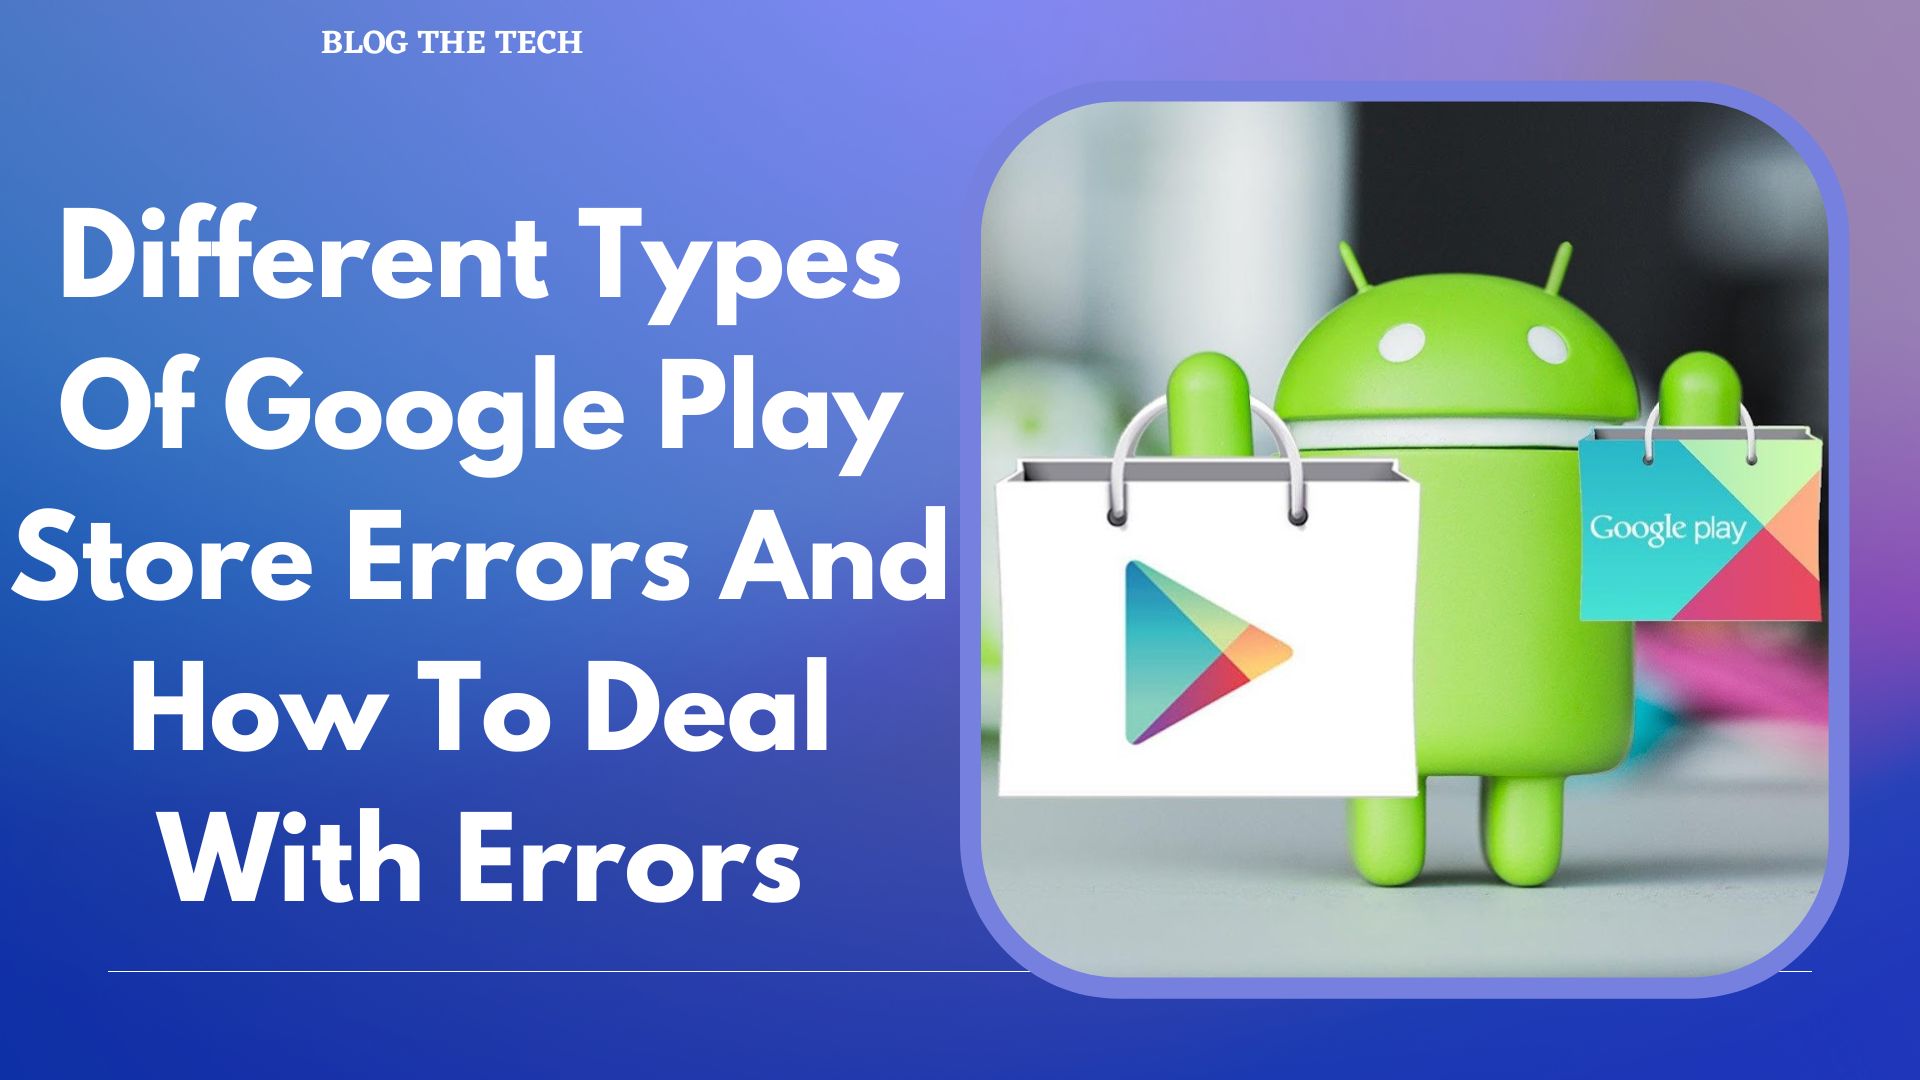 Different Types Of Google Play Store Errors And How To Deal With Errors